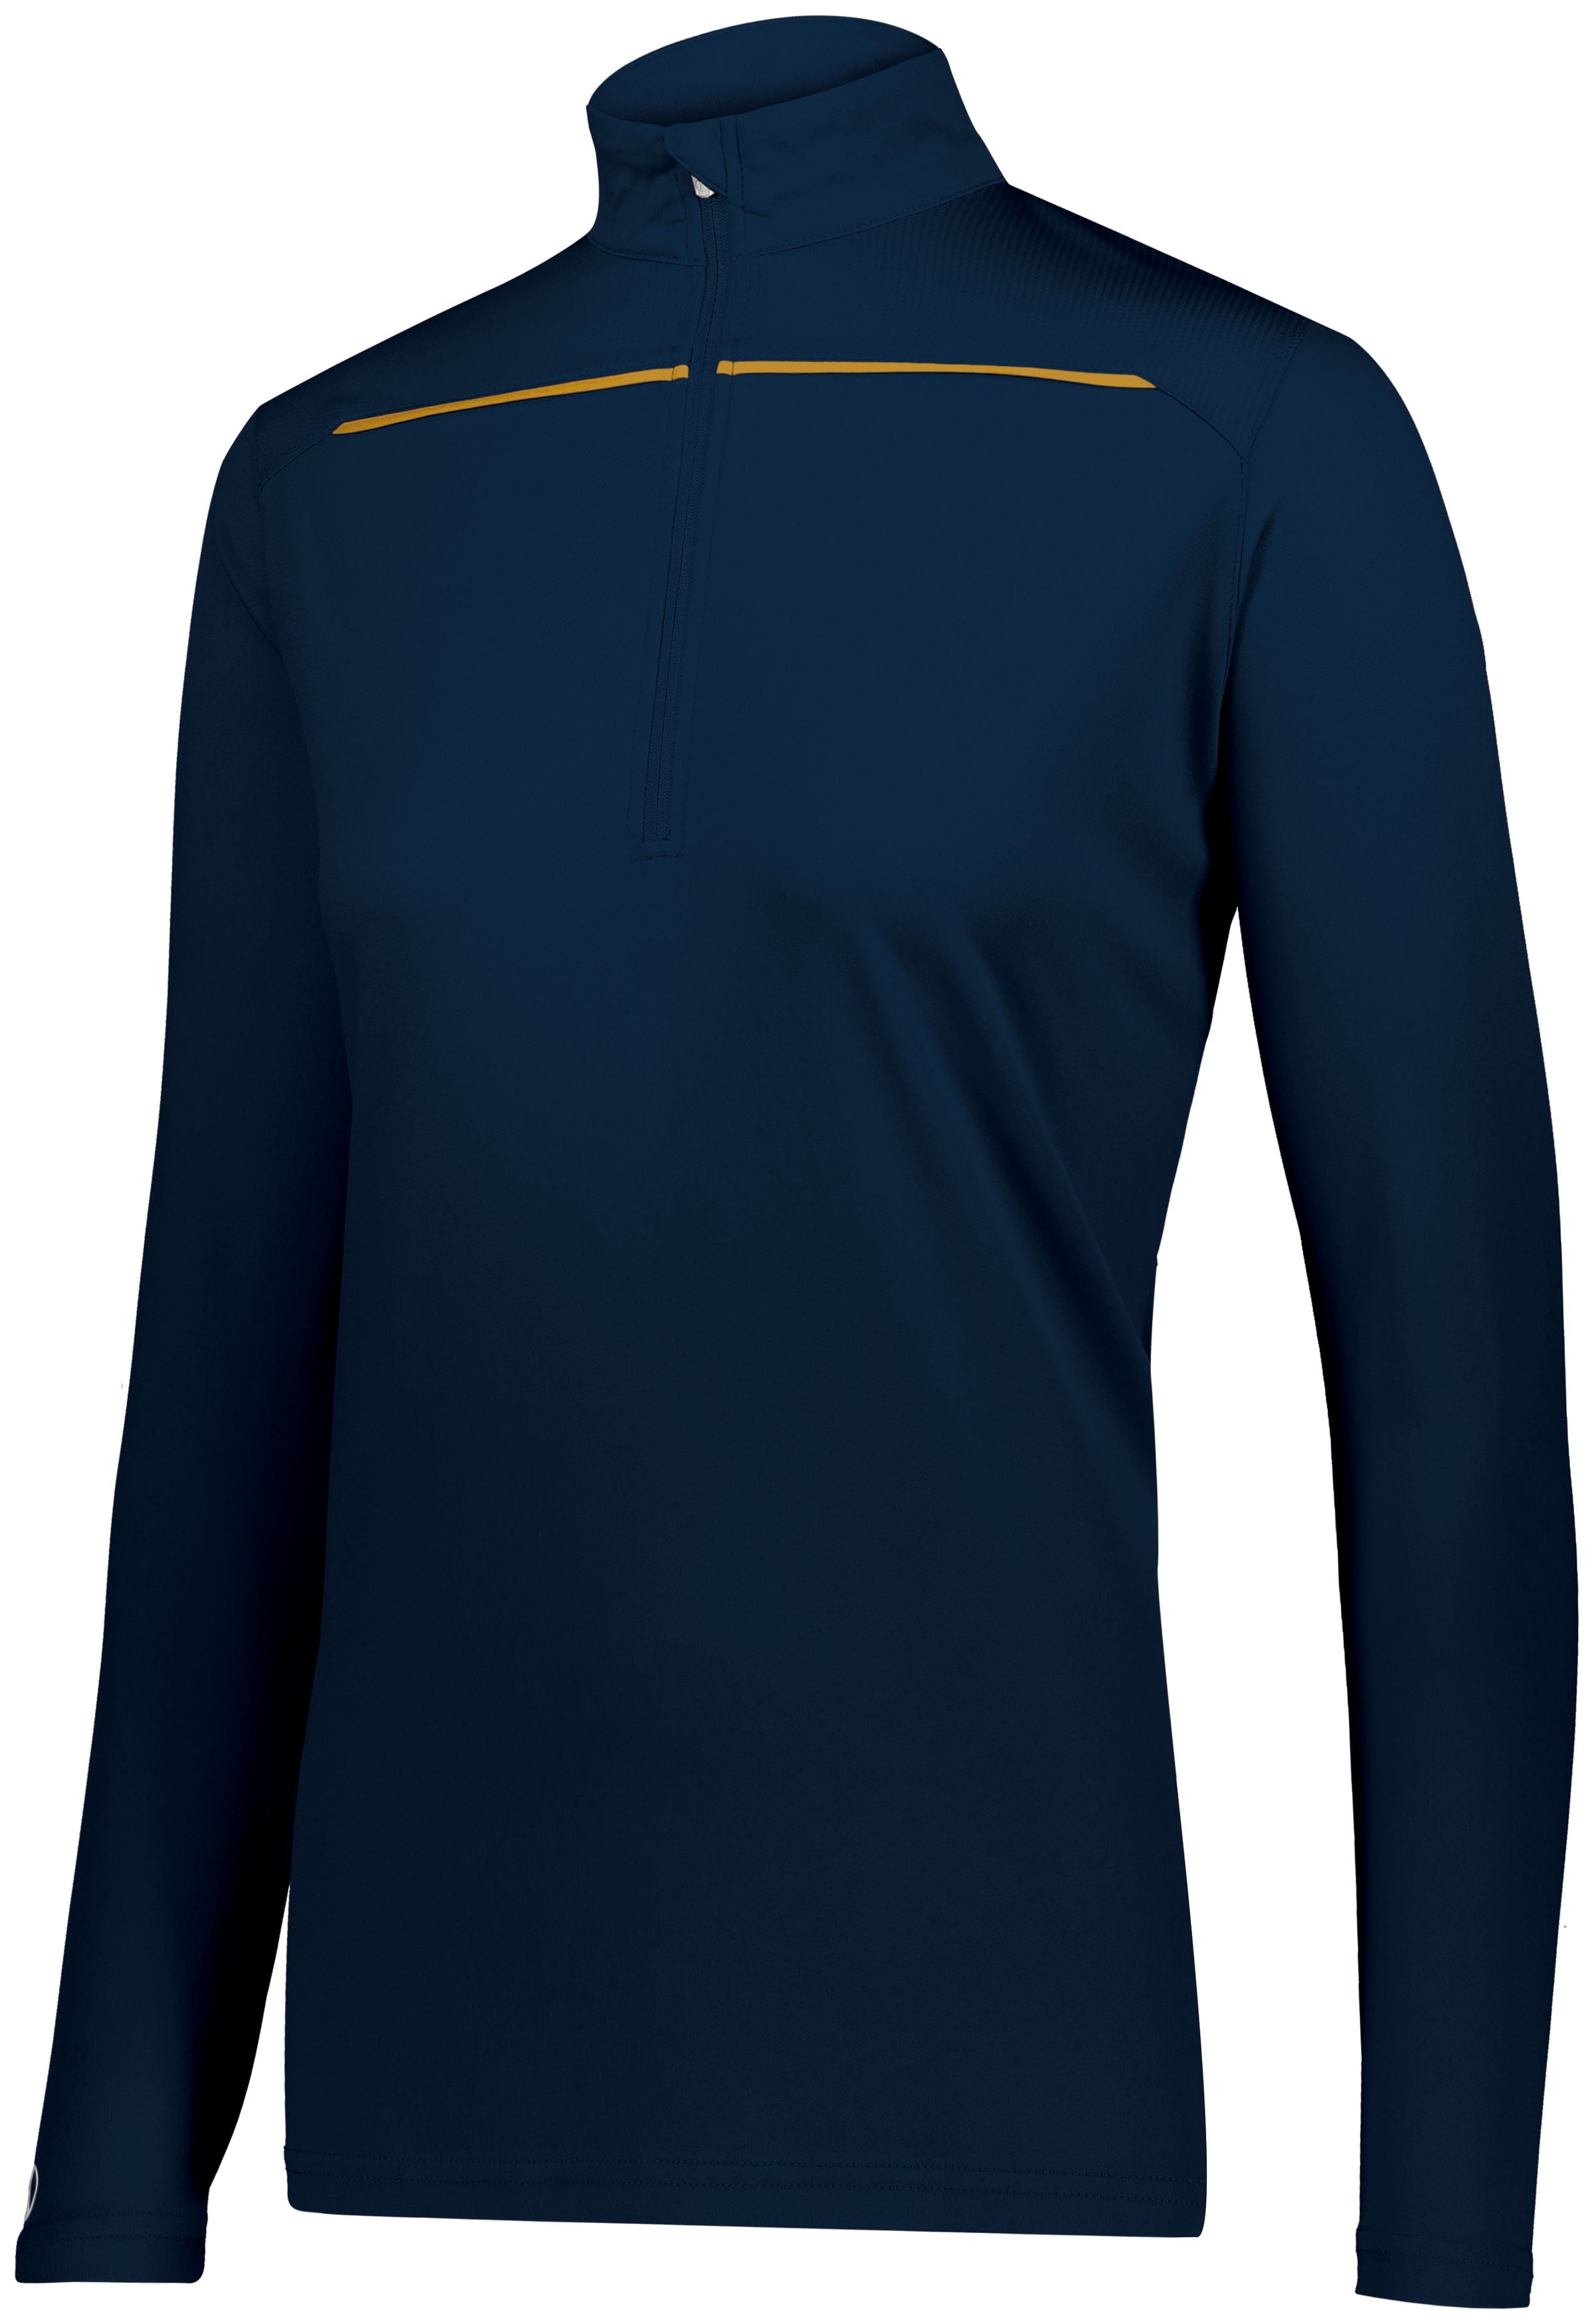 Holloway Ladies Defer Pullover in Navy/Gold  -Part of the Ladies, Ladies-Pullover, Holloway, Outerwear product lines at KanaleyCreations.com